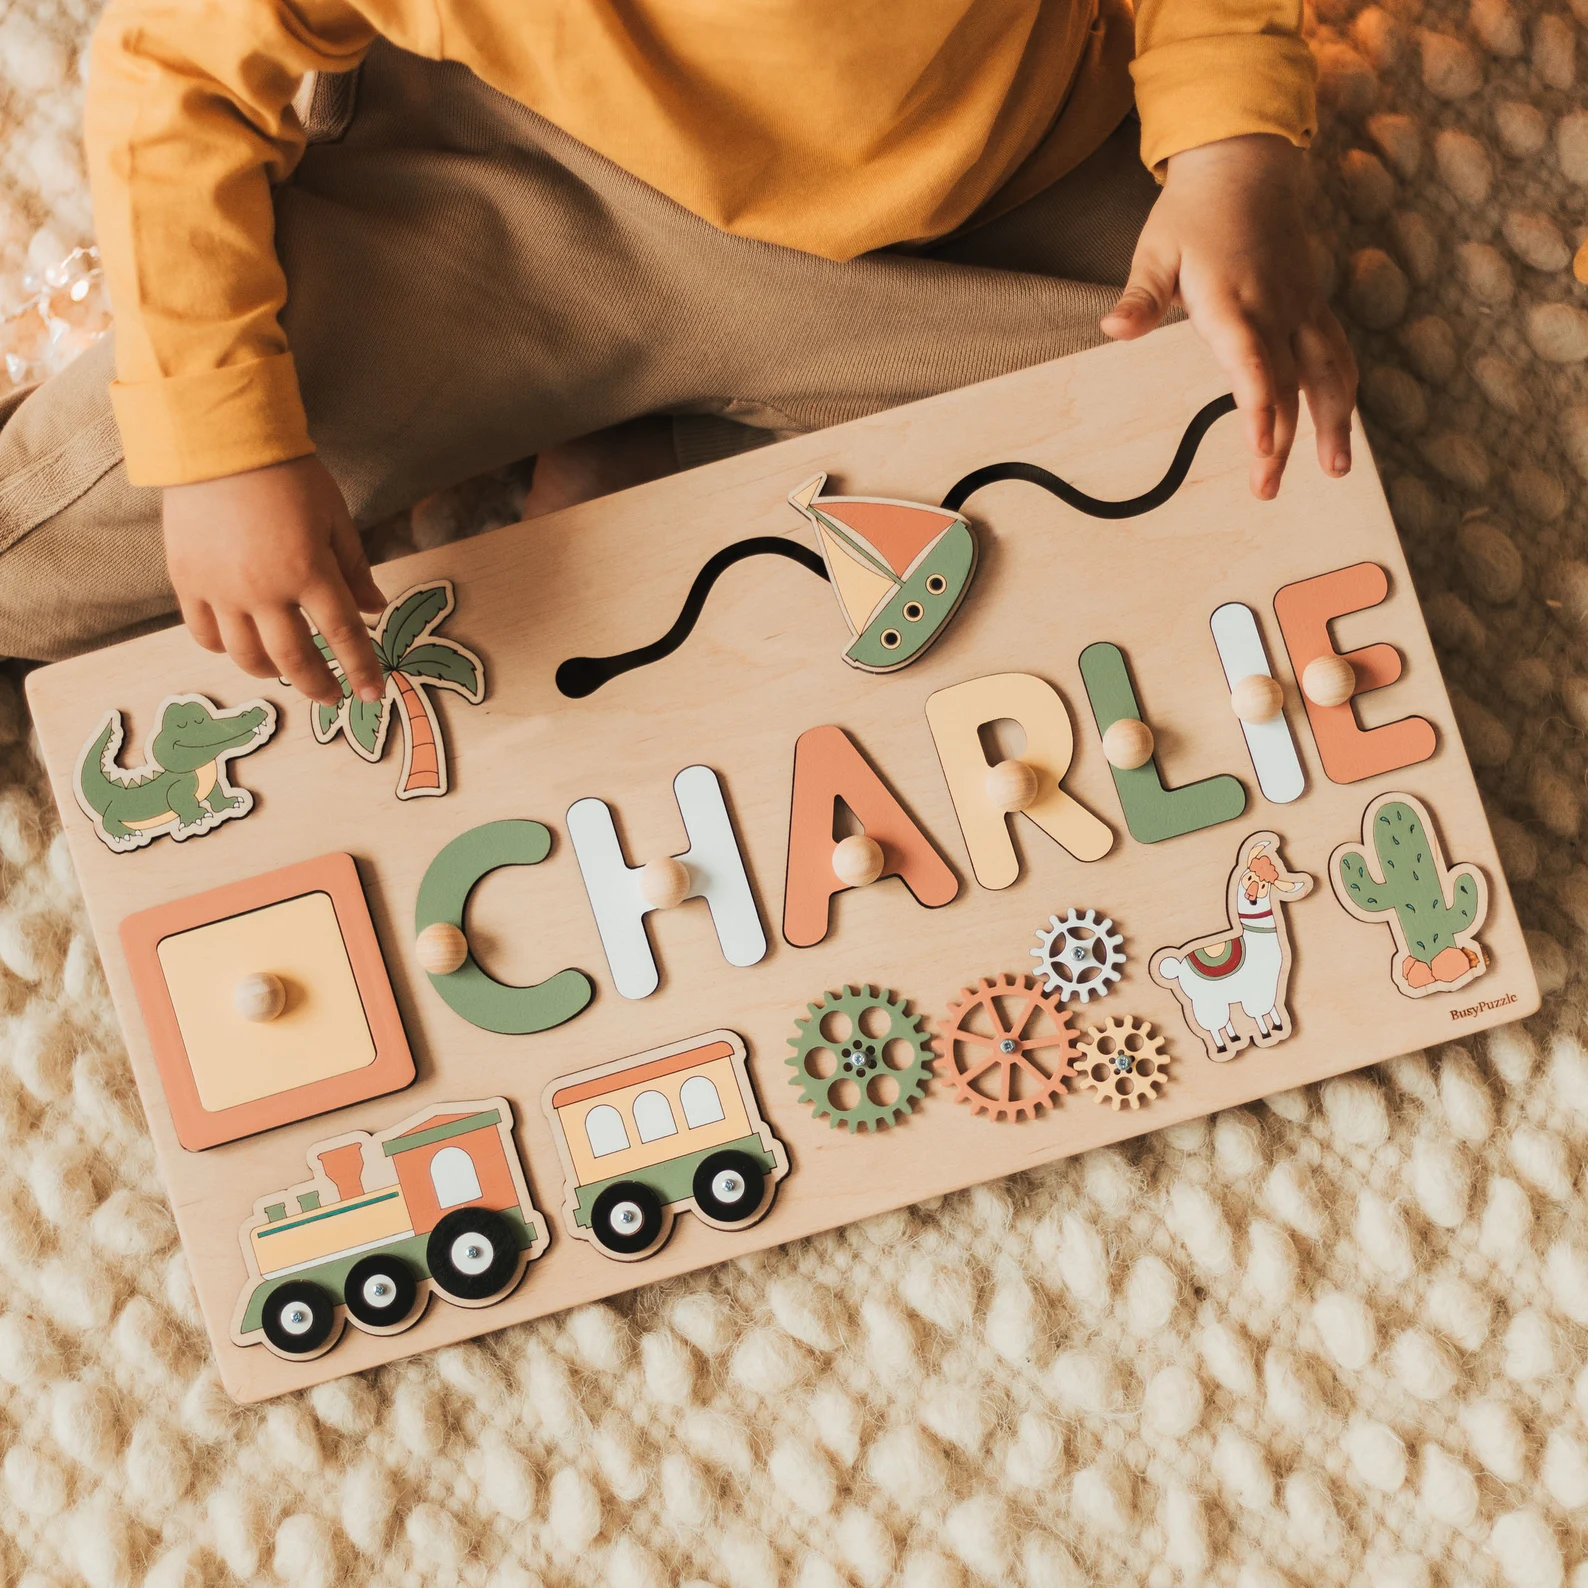 Image of child playing with busy board. Items on board include a puzzle with child's name, a train, connecting wheels.